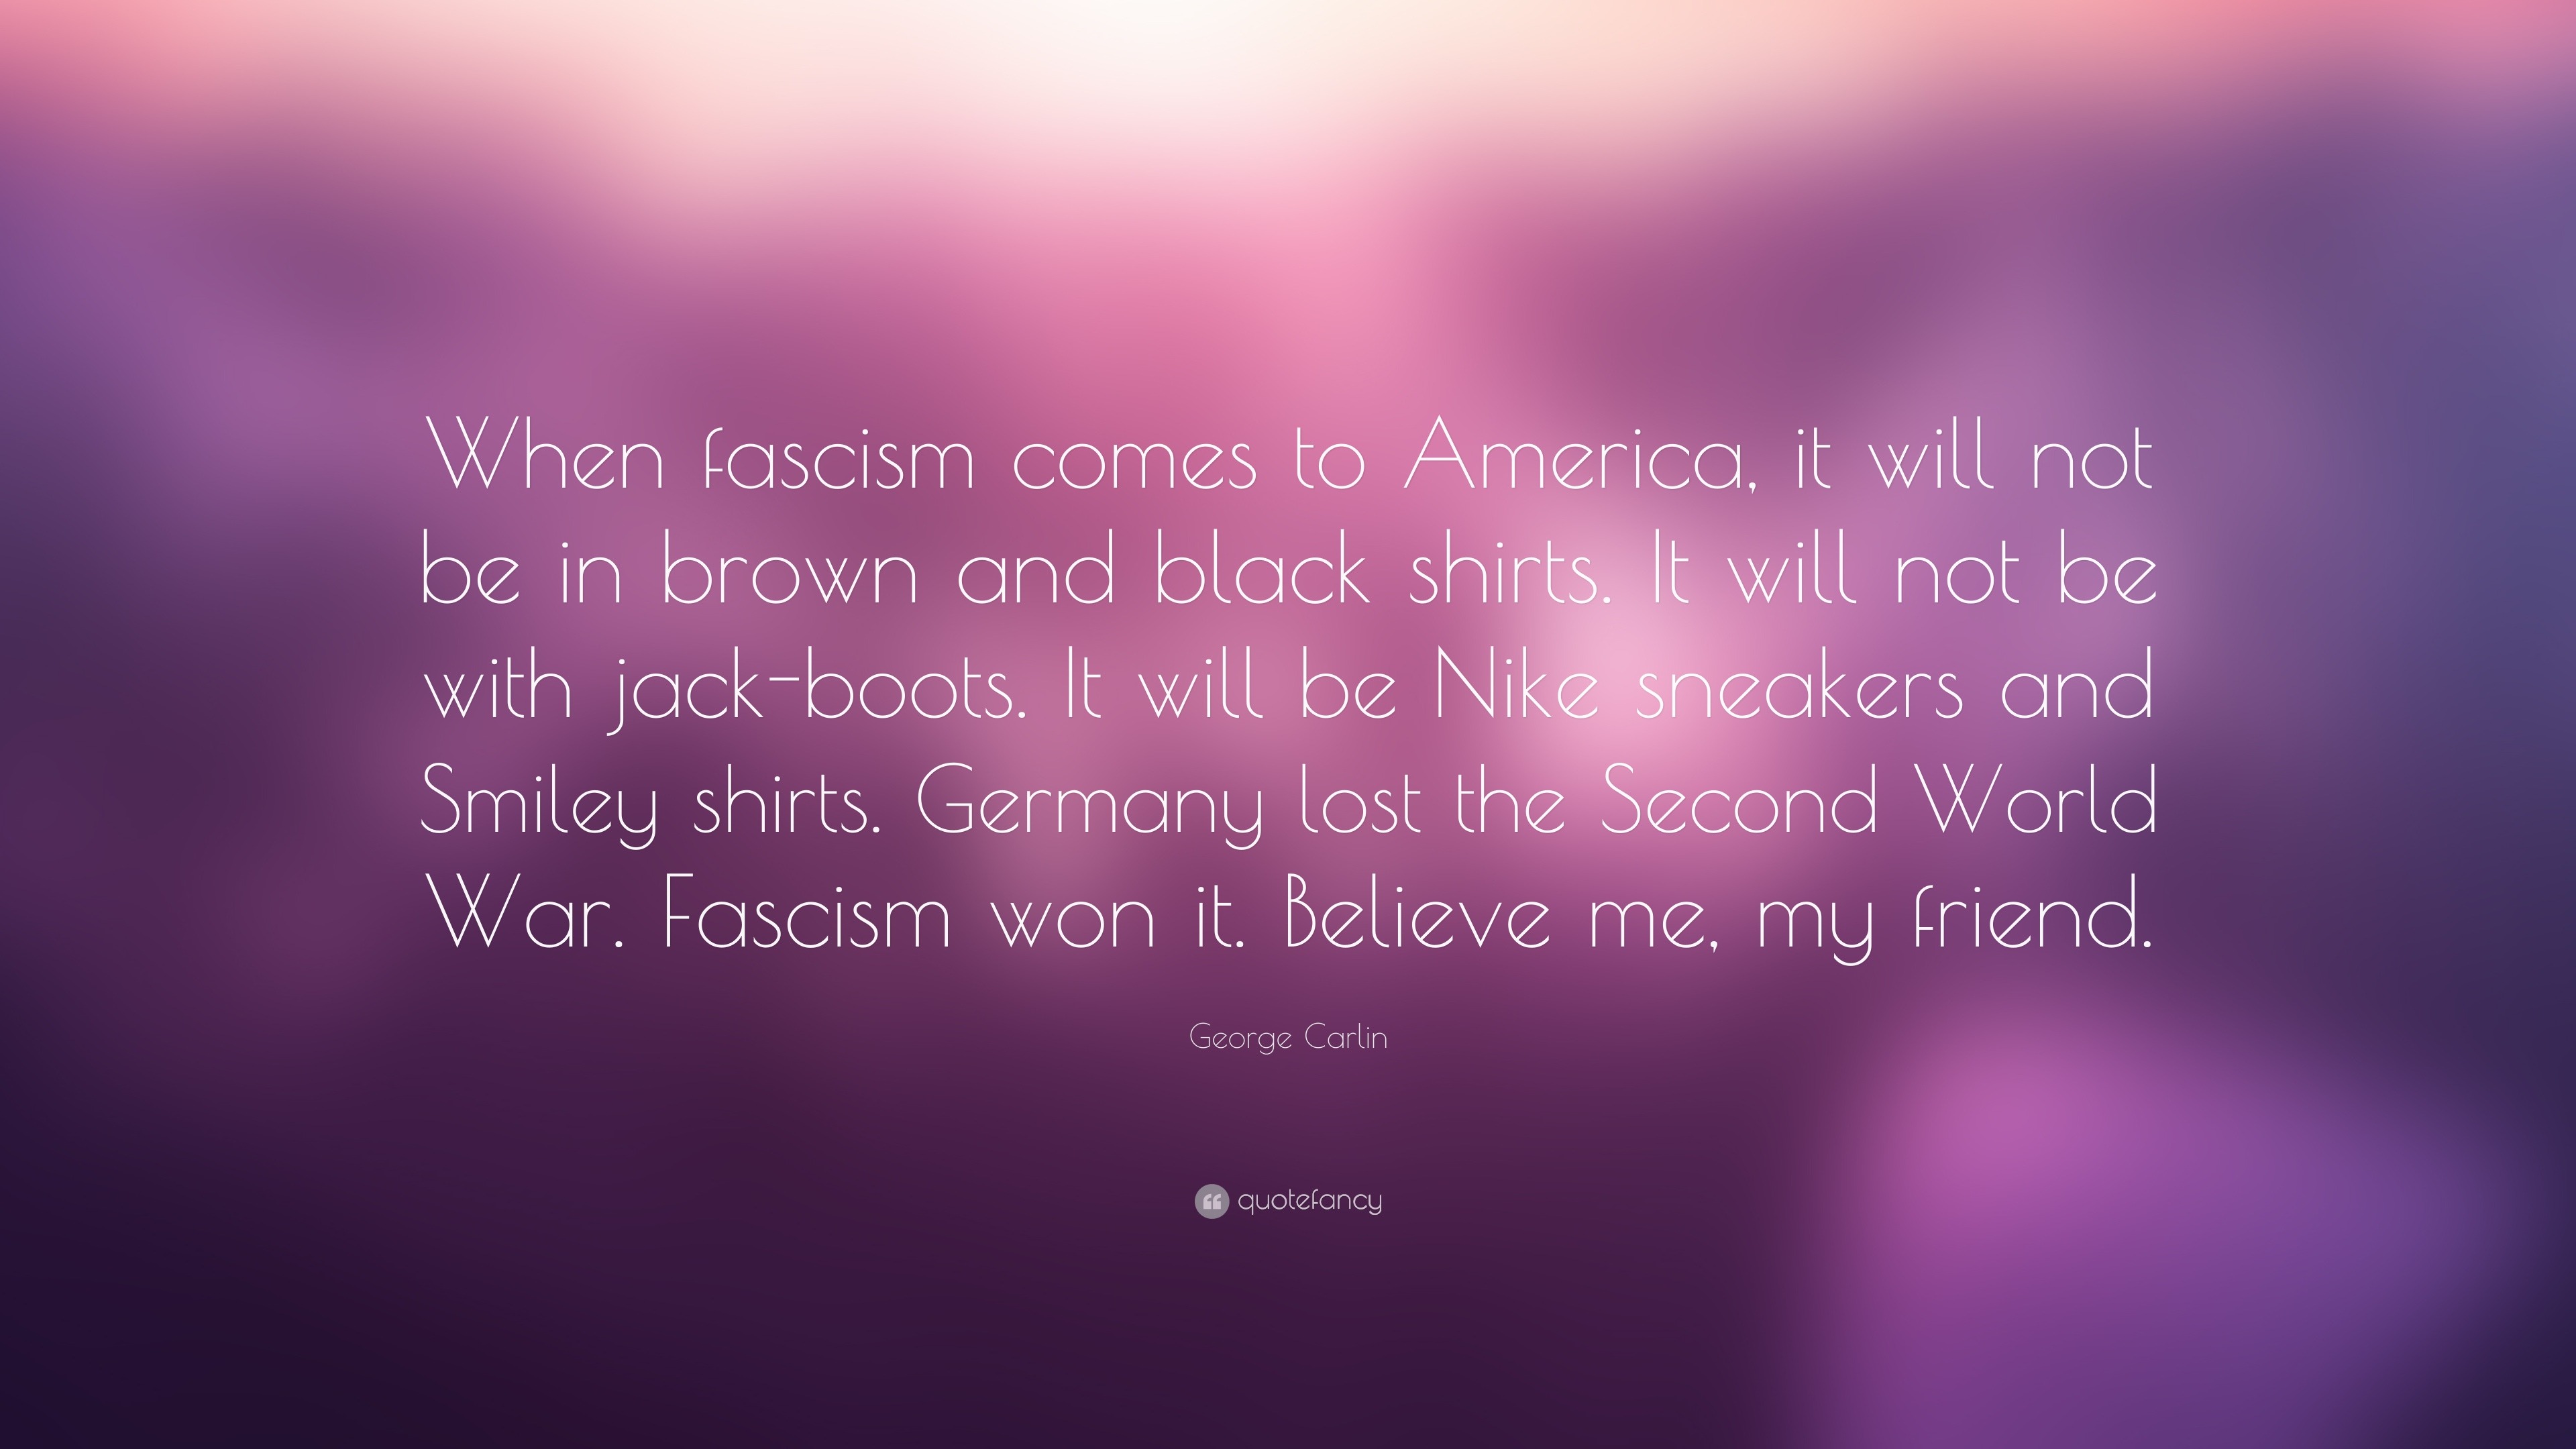 George Carlin Quote: “When fascism comes to America, it will not be in